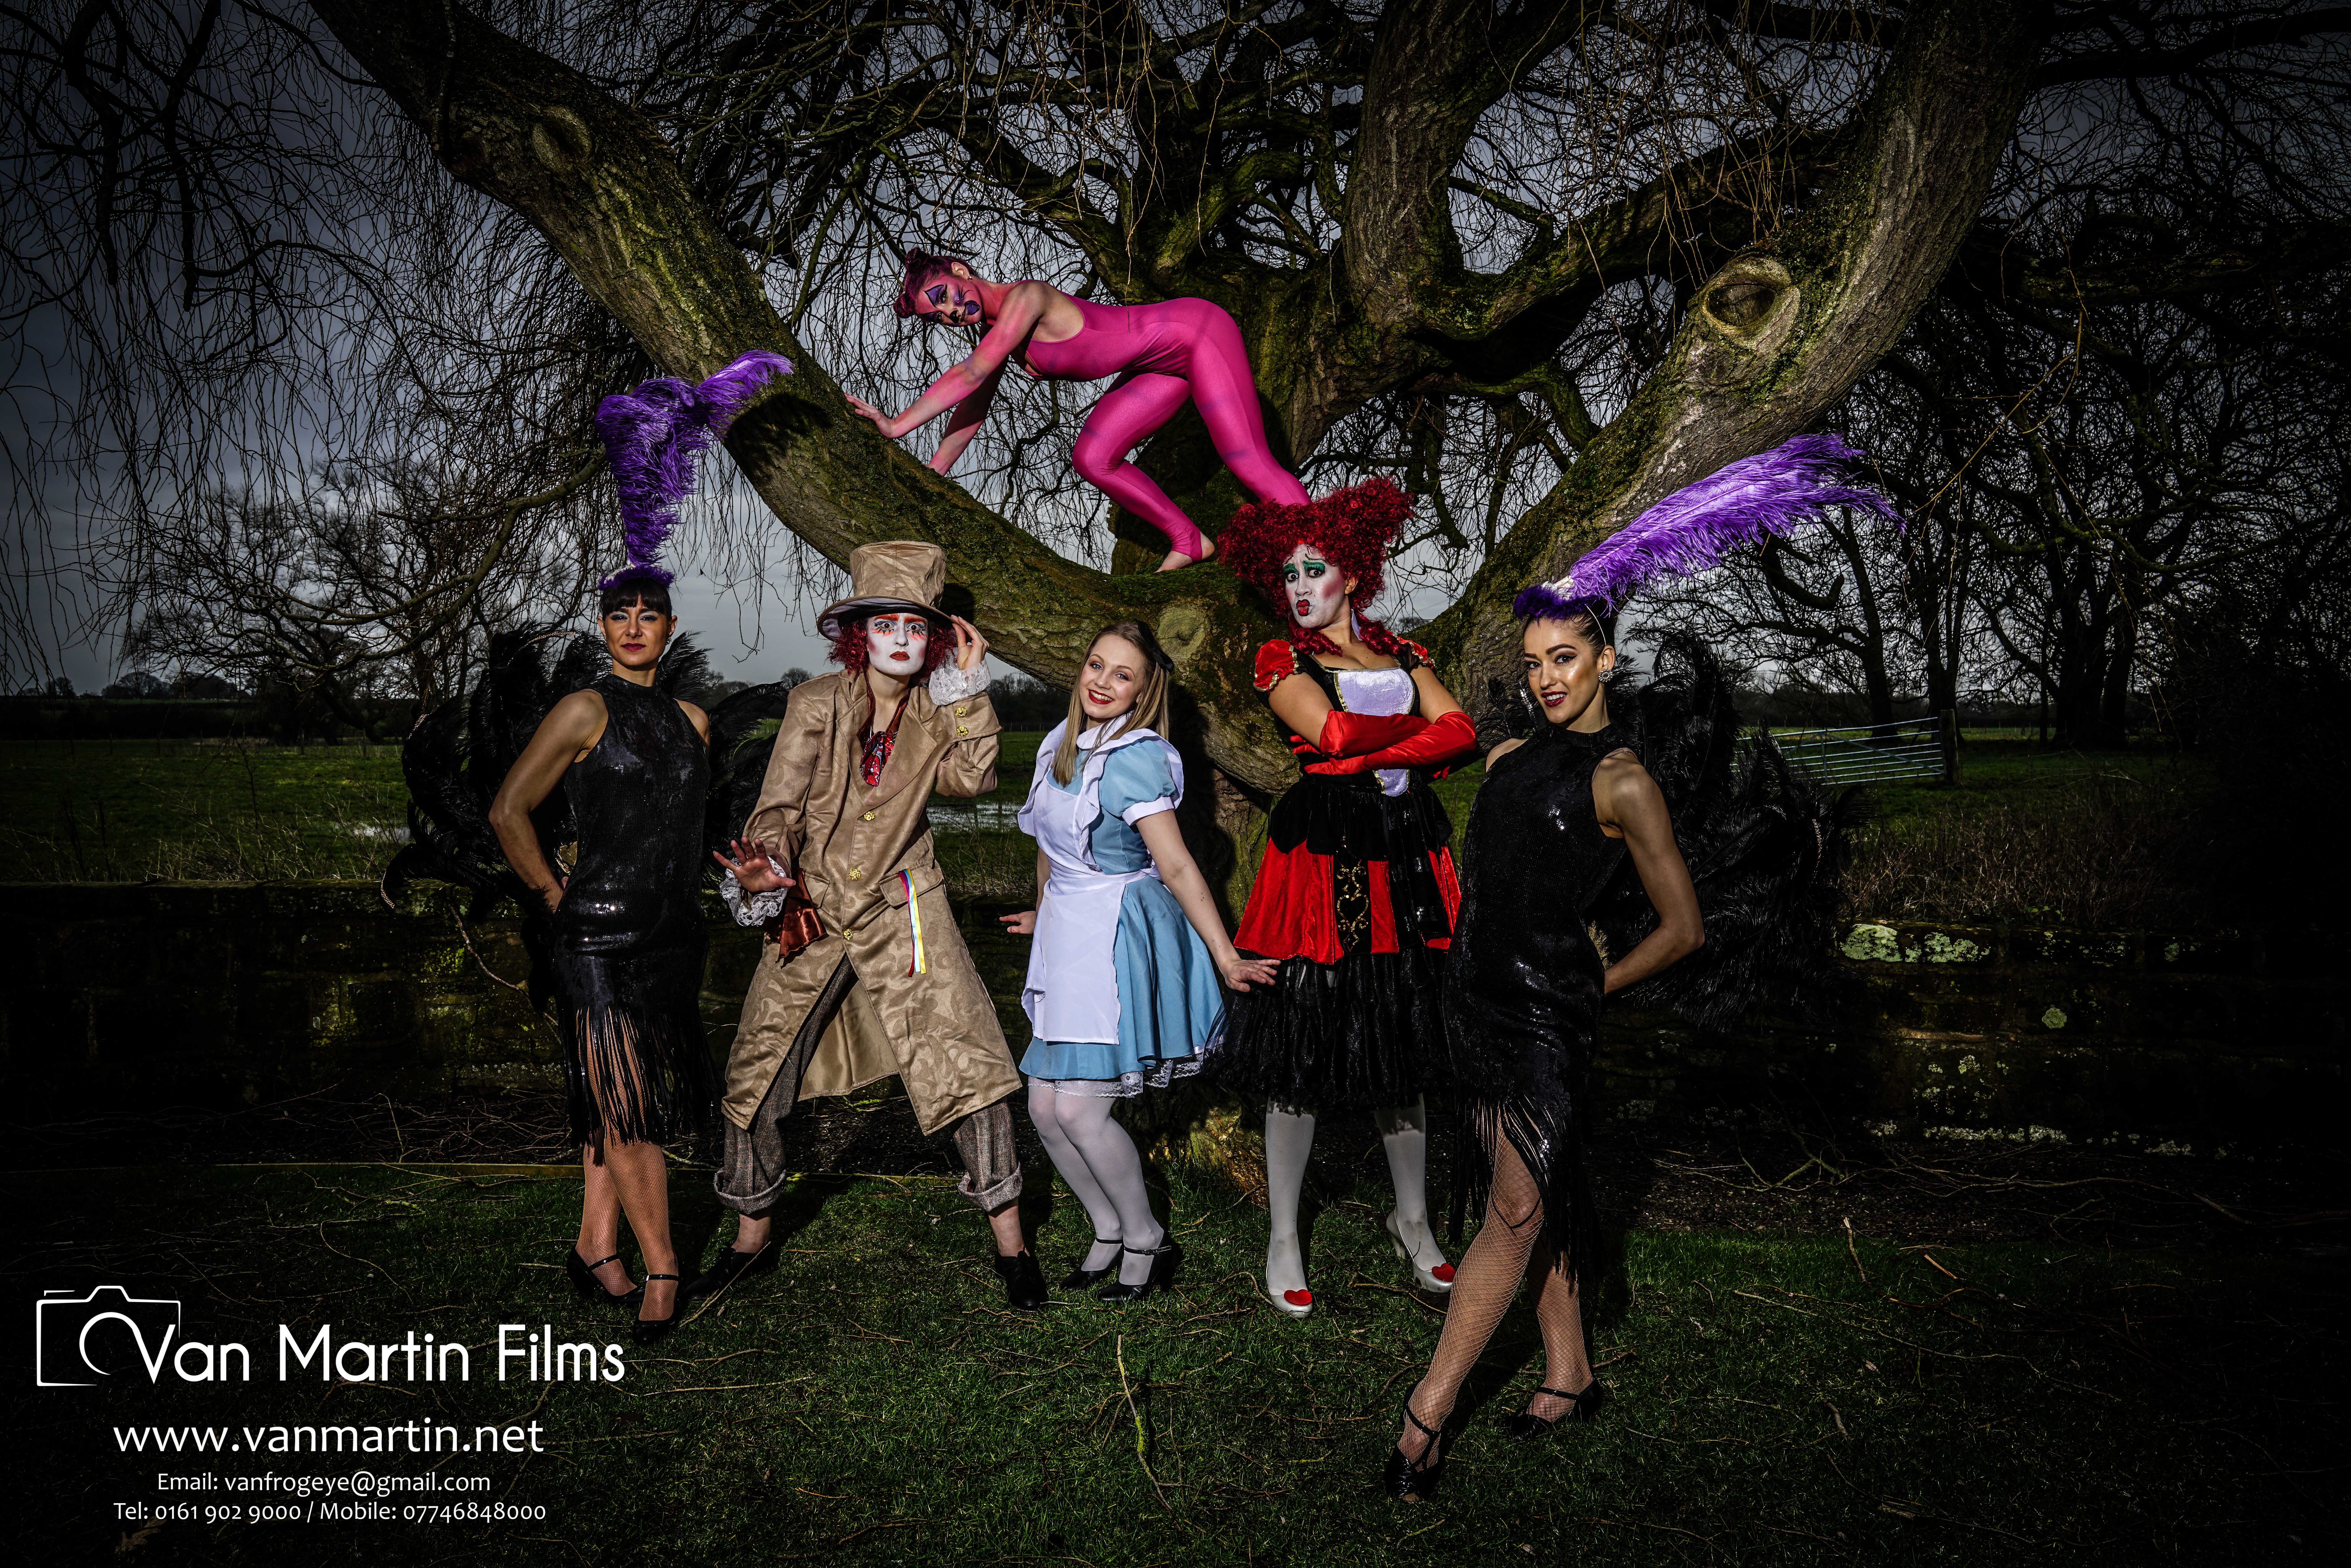 Image of Dance Entertainers putting on a Madhatter themed performance.